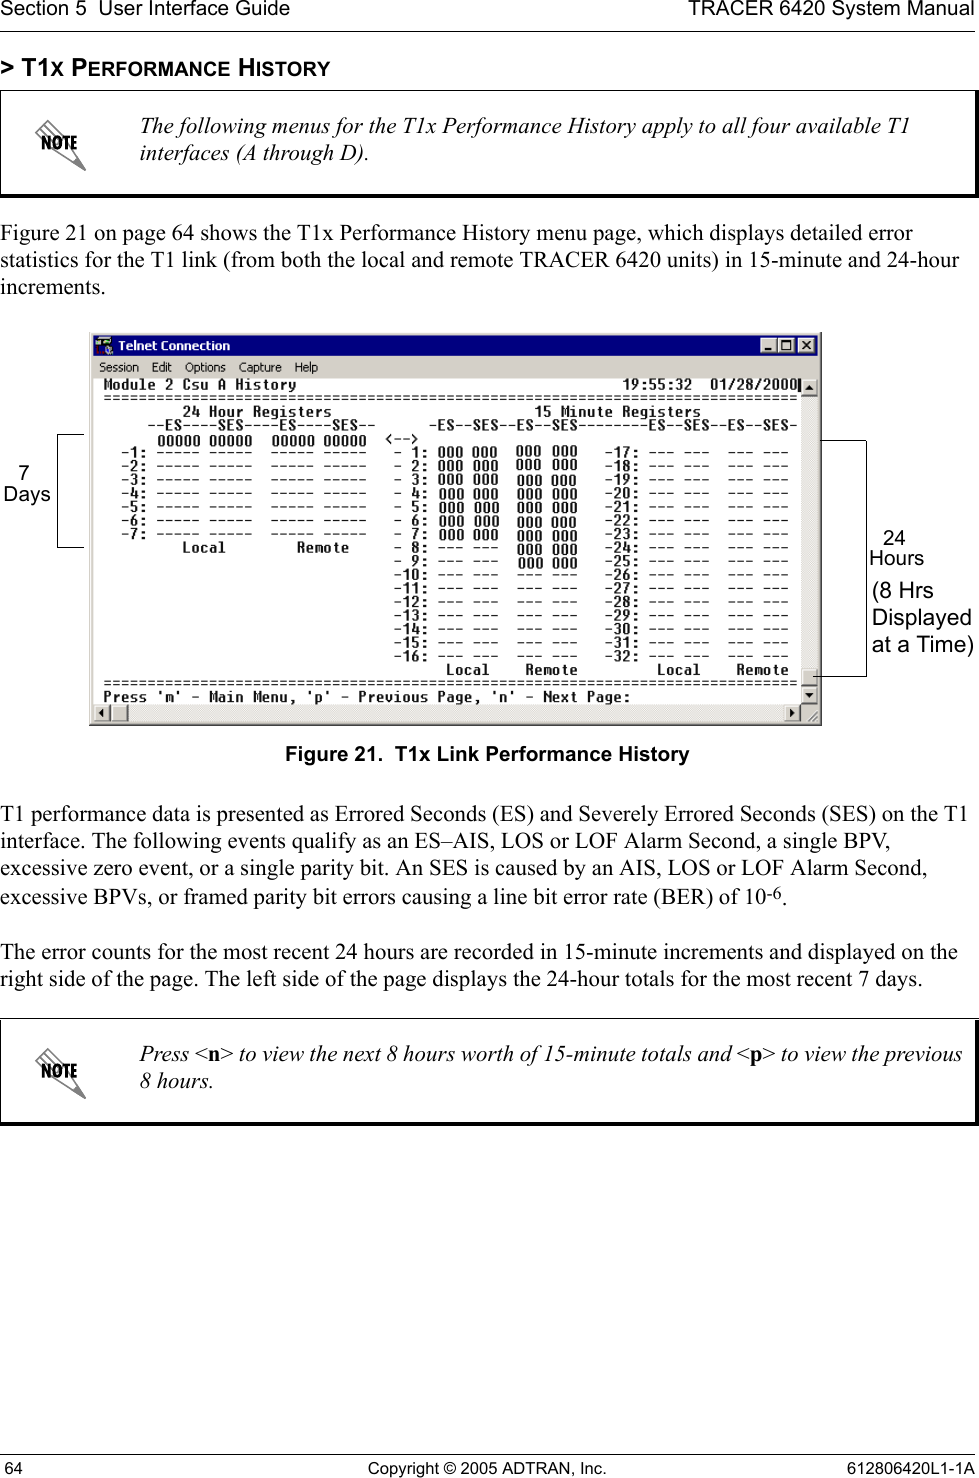 Section 5  User Interface Guide TRACER 6420 System Manual 64 Copyright © 2005 ADTRAN, Inc. 612806420L1-1A&gt; T1X PERFORMANCE HISTORYFigure 21 on page 64 shows the T1x Performance History menu page, which displays detailed error statistics for the T1 link (from both the local and remote TRACER 6420 units) in 15-minute and 24-hour increments.Figure 21.  T1x Link Performance HistoryT1 performance data is presented as Errored Seconds (ES) and Severely Errored Seconds (SES) on the T1 interface. The following events qualify as an ES–AIS, LOS or LOF Alarm Second, a single BPV, excessive zero event, or a single parity bit. An SES is caused by an AIS, LOS or LOF Alarm Second, excessive BPVs, or framed parity bit errors causing a line bit error rate (BER) of 10-6.The error counts for the most recent 24 hours are recorded in 15-minute increments and displayed on the right side of the page. The left side of the page displays the 24-hour totals for the most recent 7 days.The following menus for the T1x Performance History apply to all four available T1 interfaces (A through D).Press &lt;n&gt; to view the next 8 hours worth of 15-minute totals and &lt;p&gt; to view the previous 8 hours.24 Hours7 Days(8 Hrs Displayed at a Time)